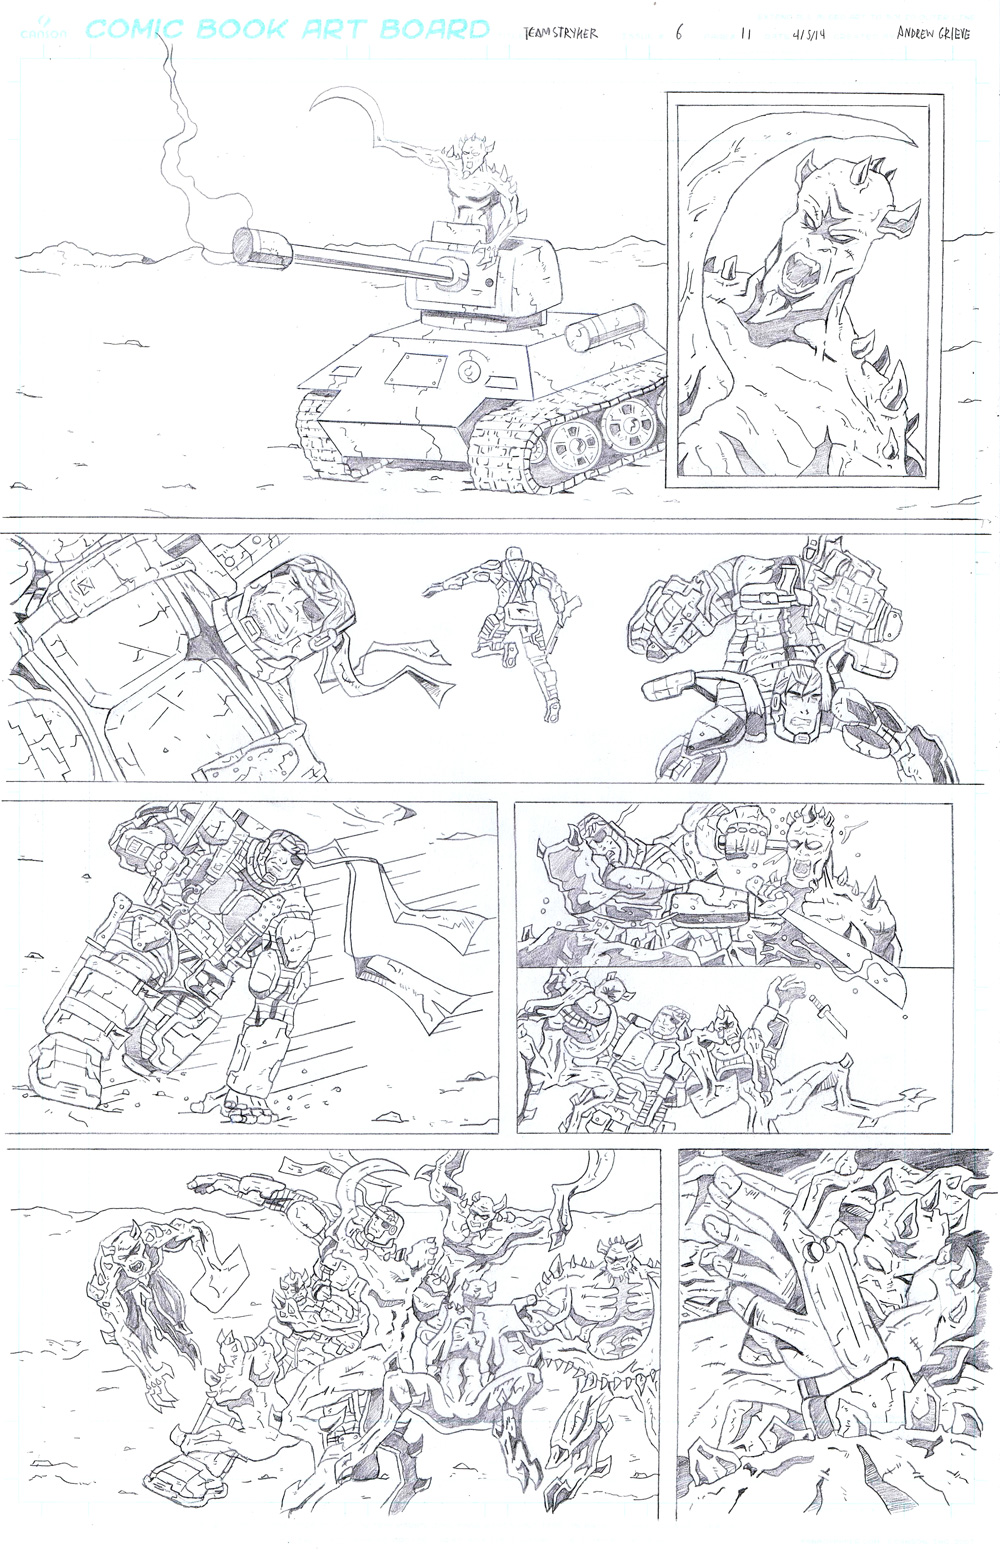 MISSION 006: PAGE 11 PENCIL